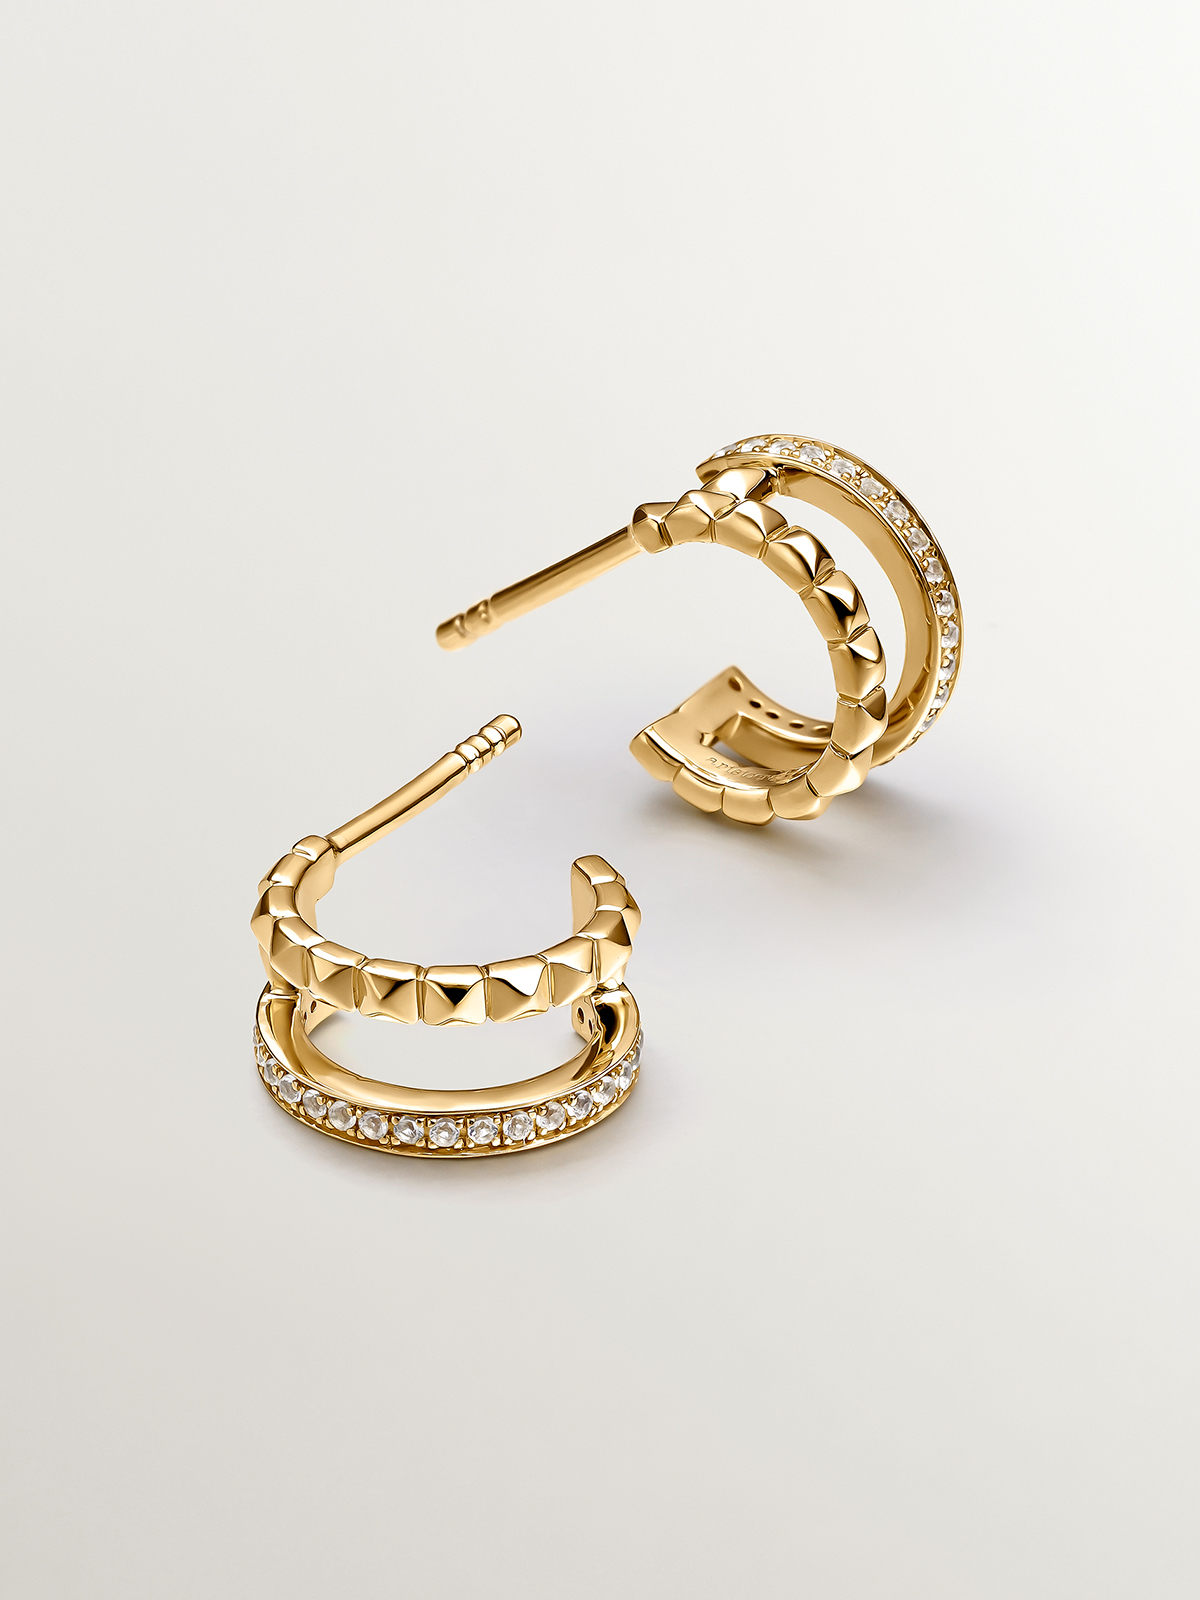 Small double hoop earrings made from 925 silver bathed in 18K yellow gold with embossing and white topazes.